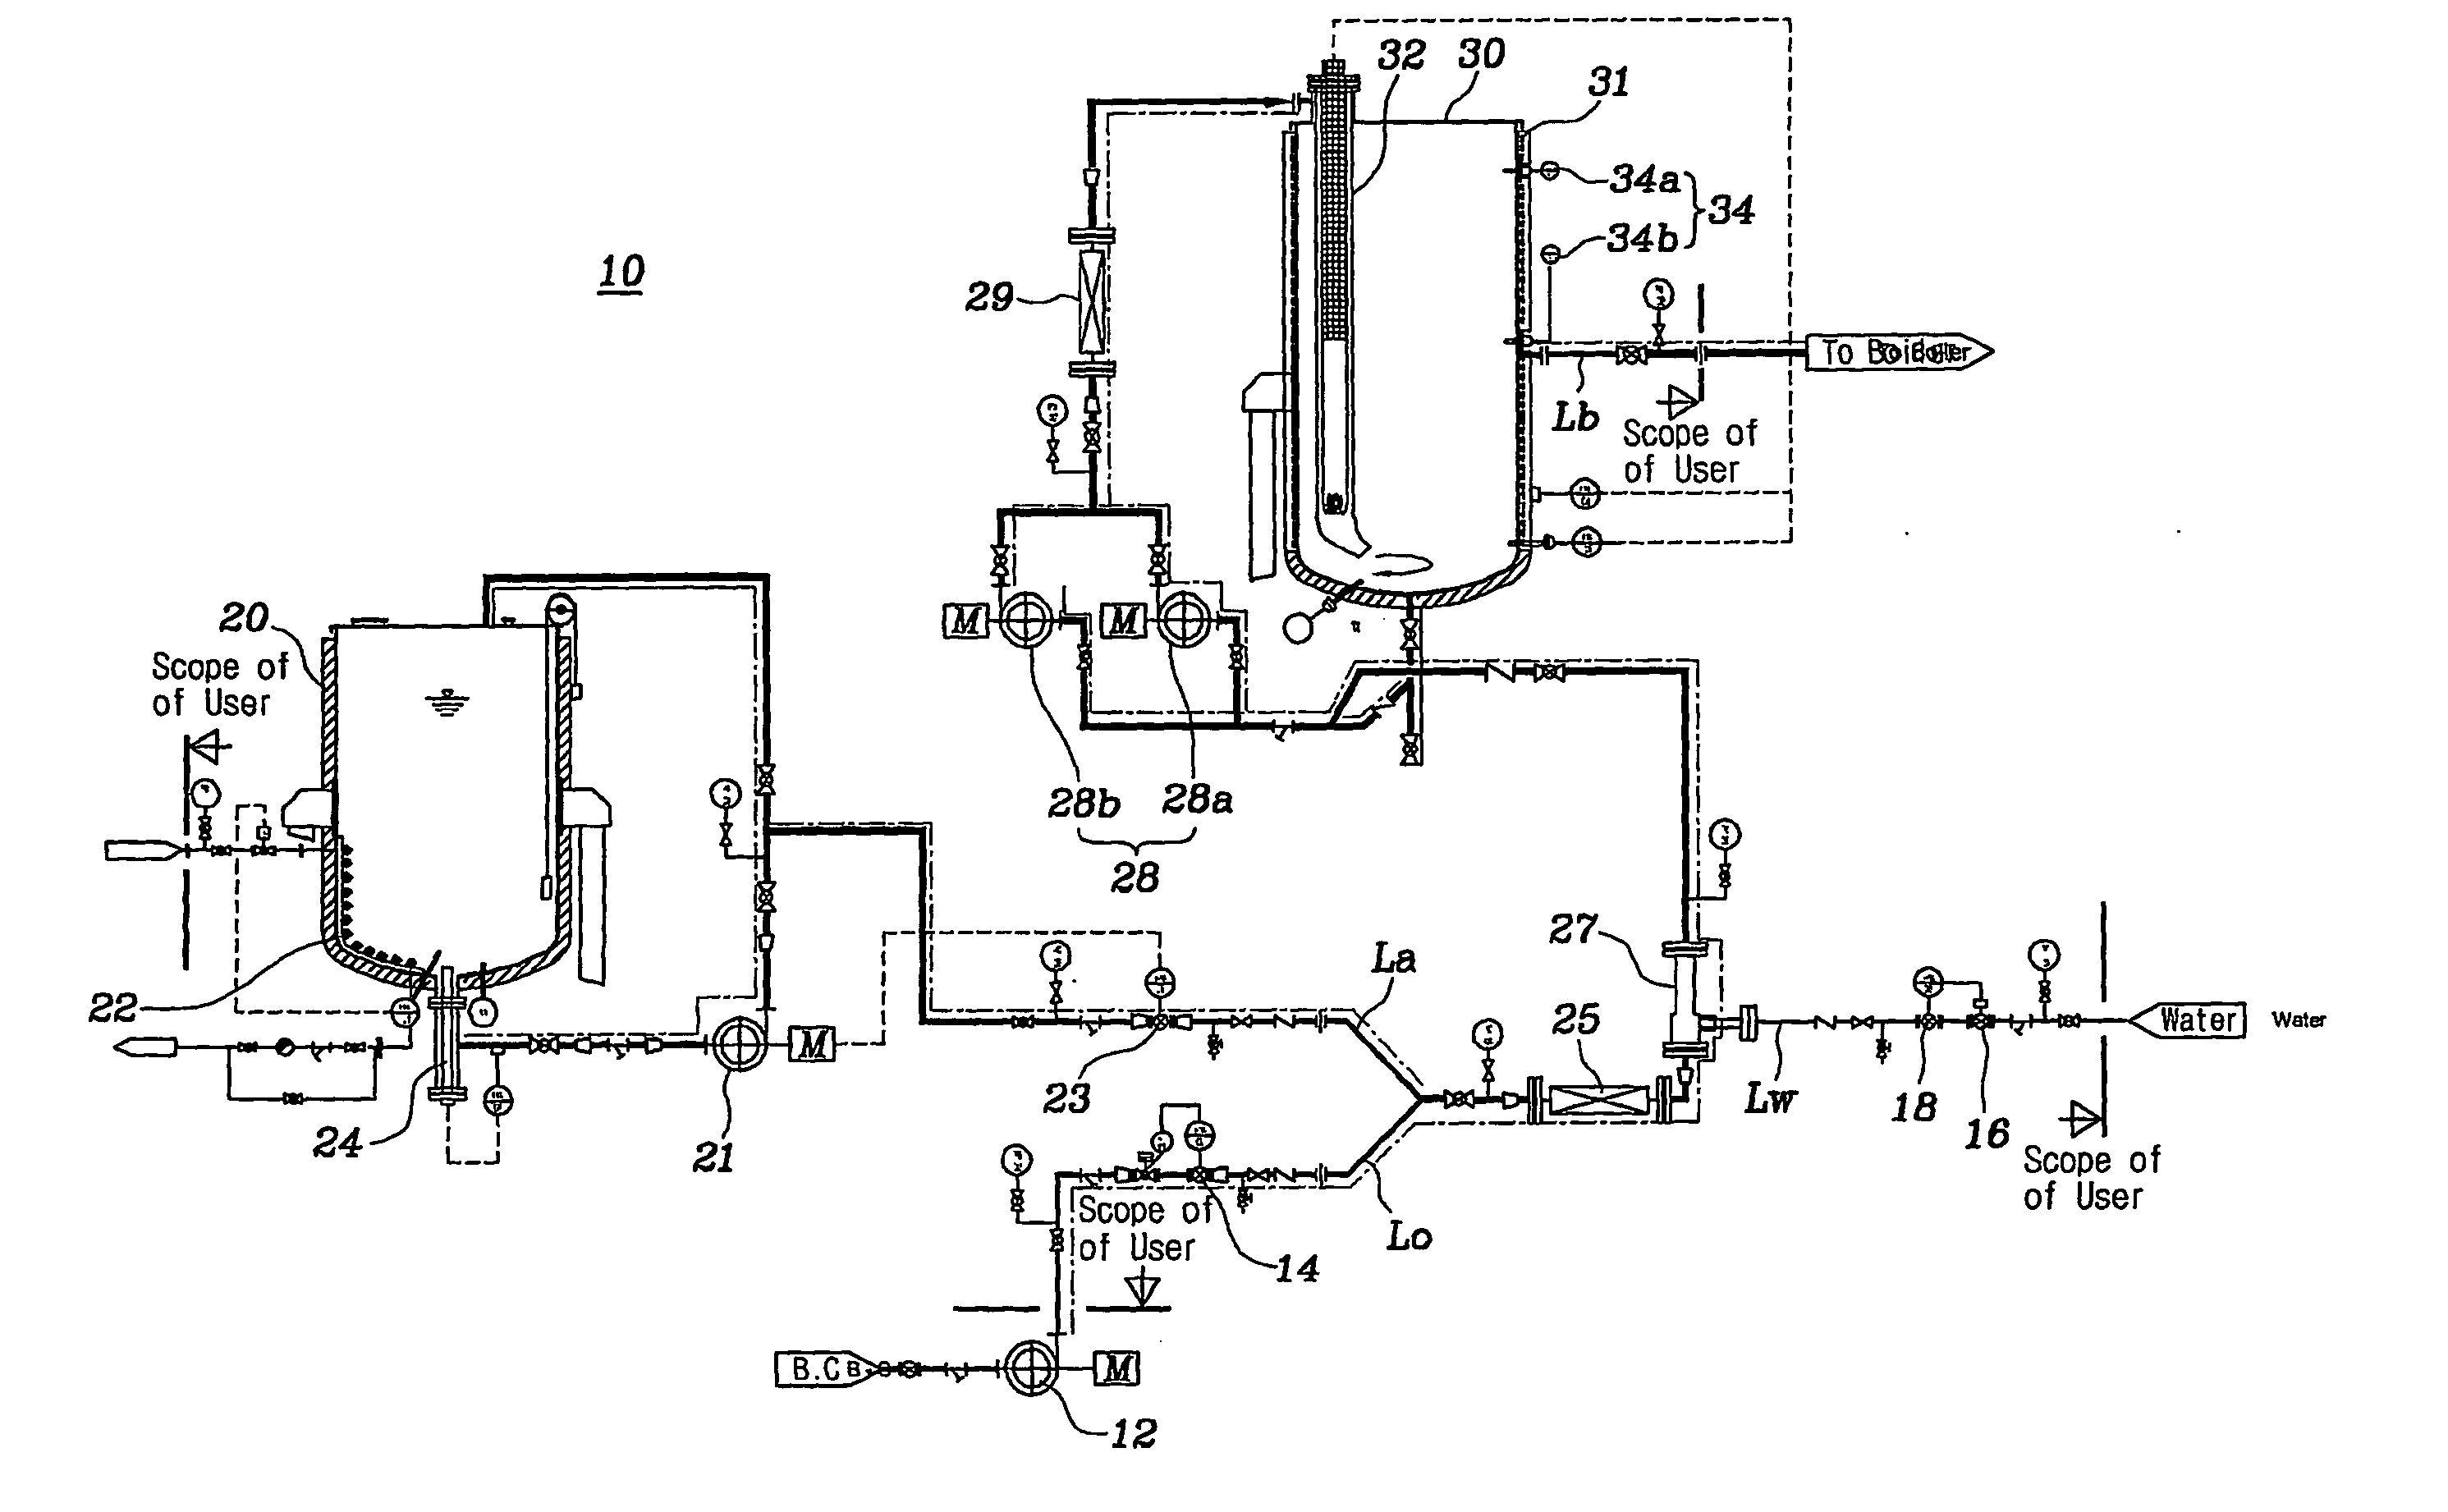 Apparatus for producing water-in-oil emulsifield fuel and supplying the same